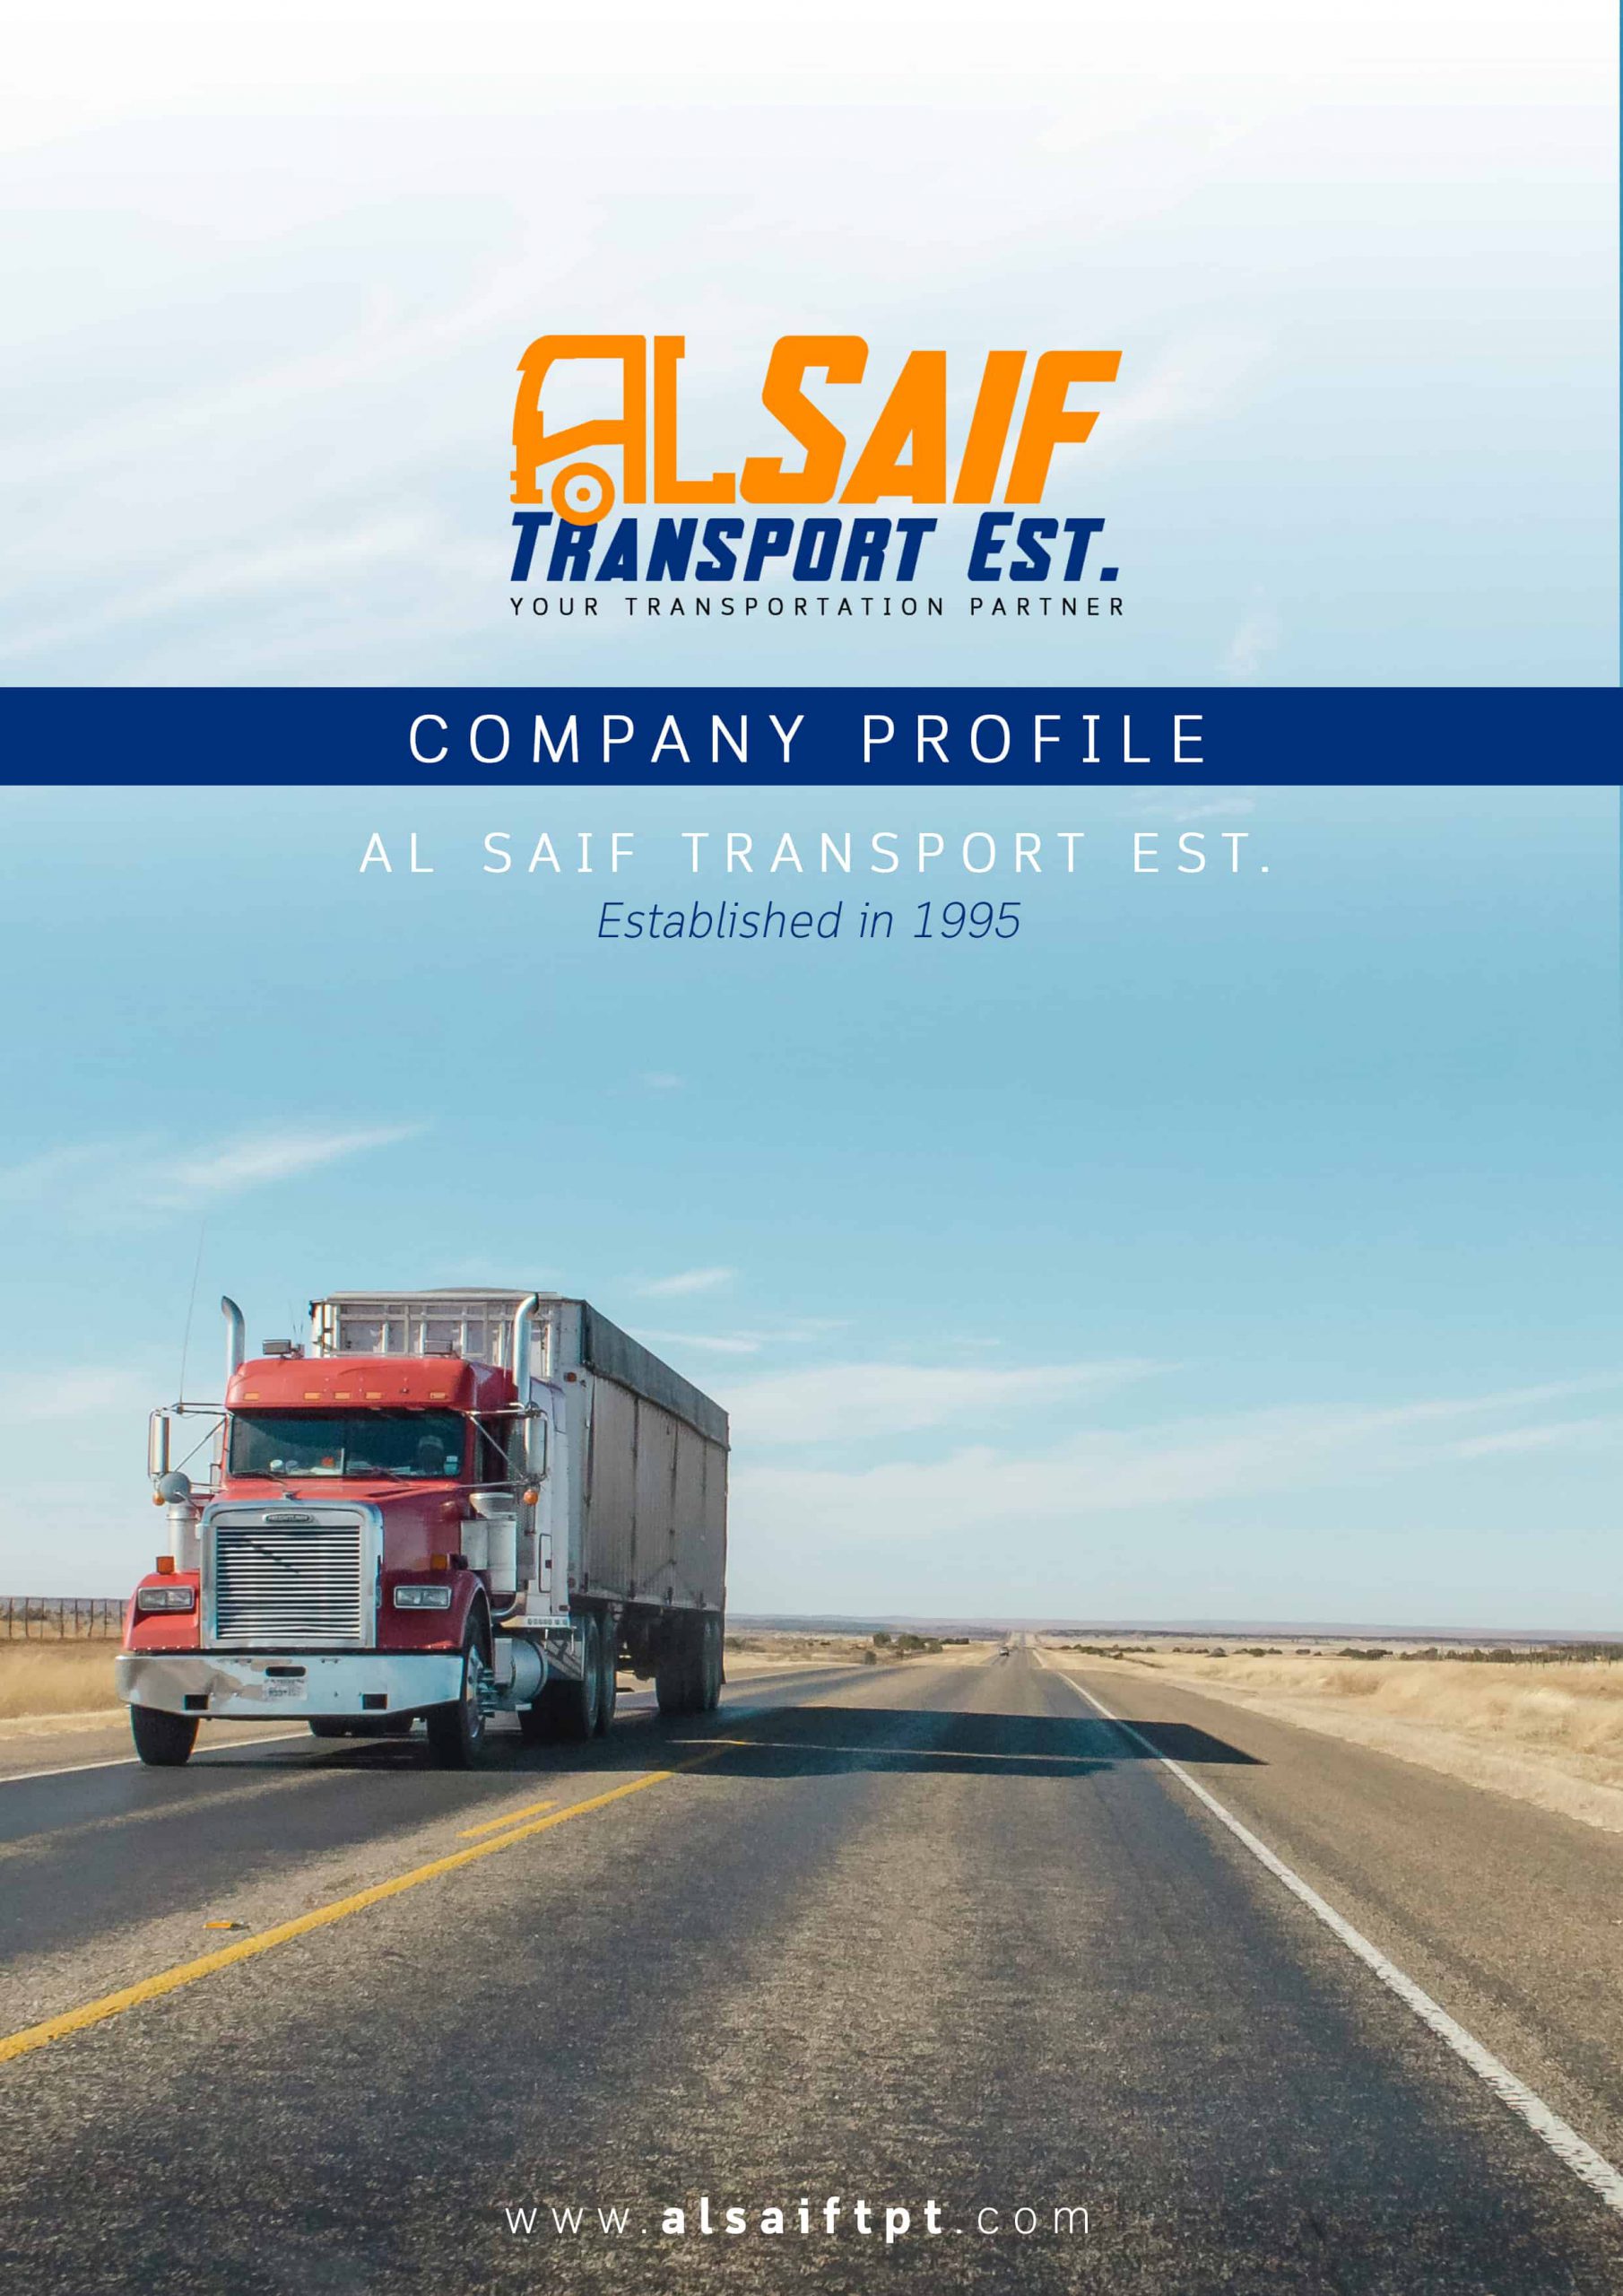 Alsaif company profile design - front page image